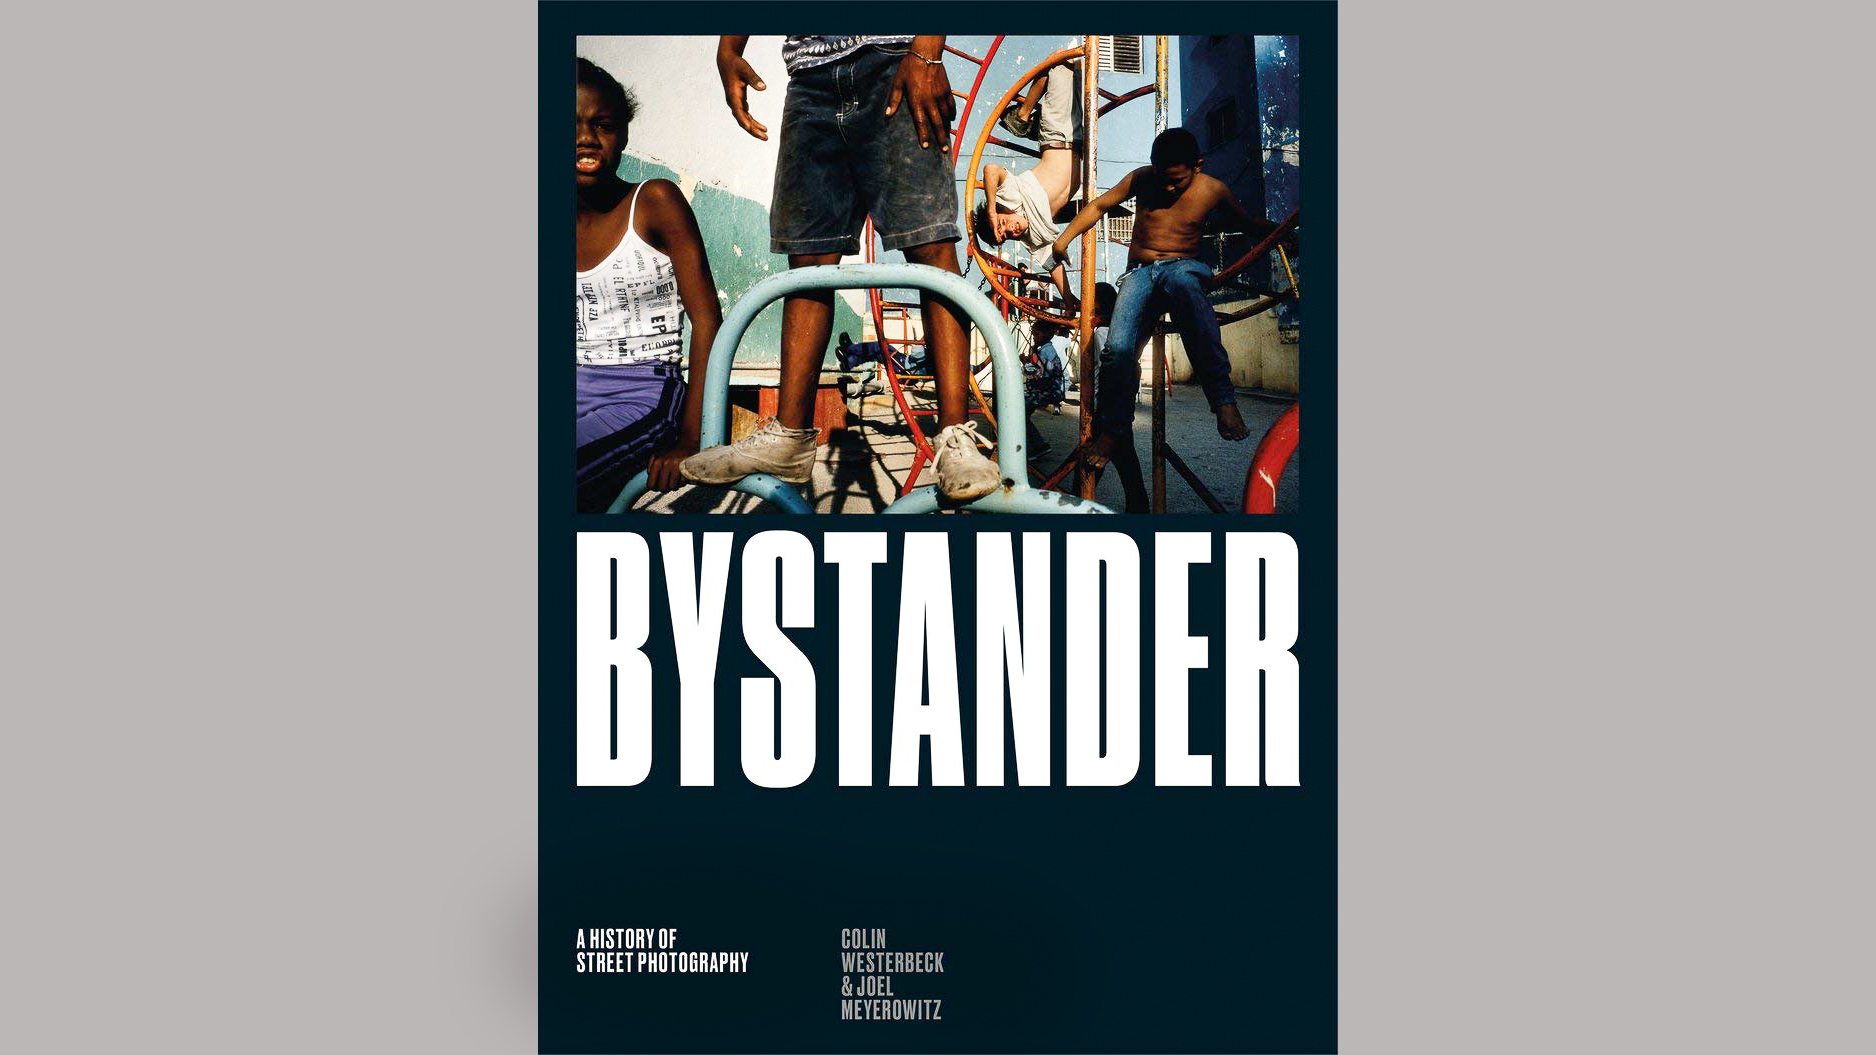 Cover of Bystander: A History of Street Photography, one of the best books on photography